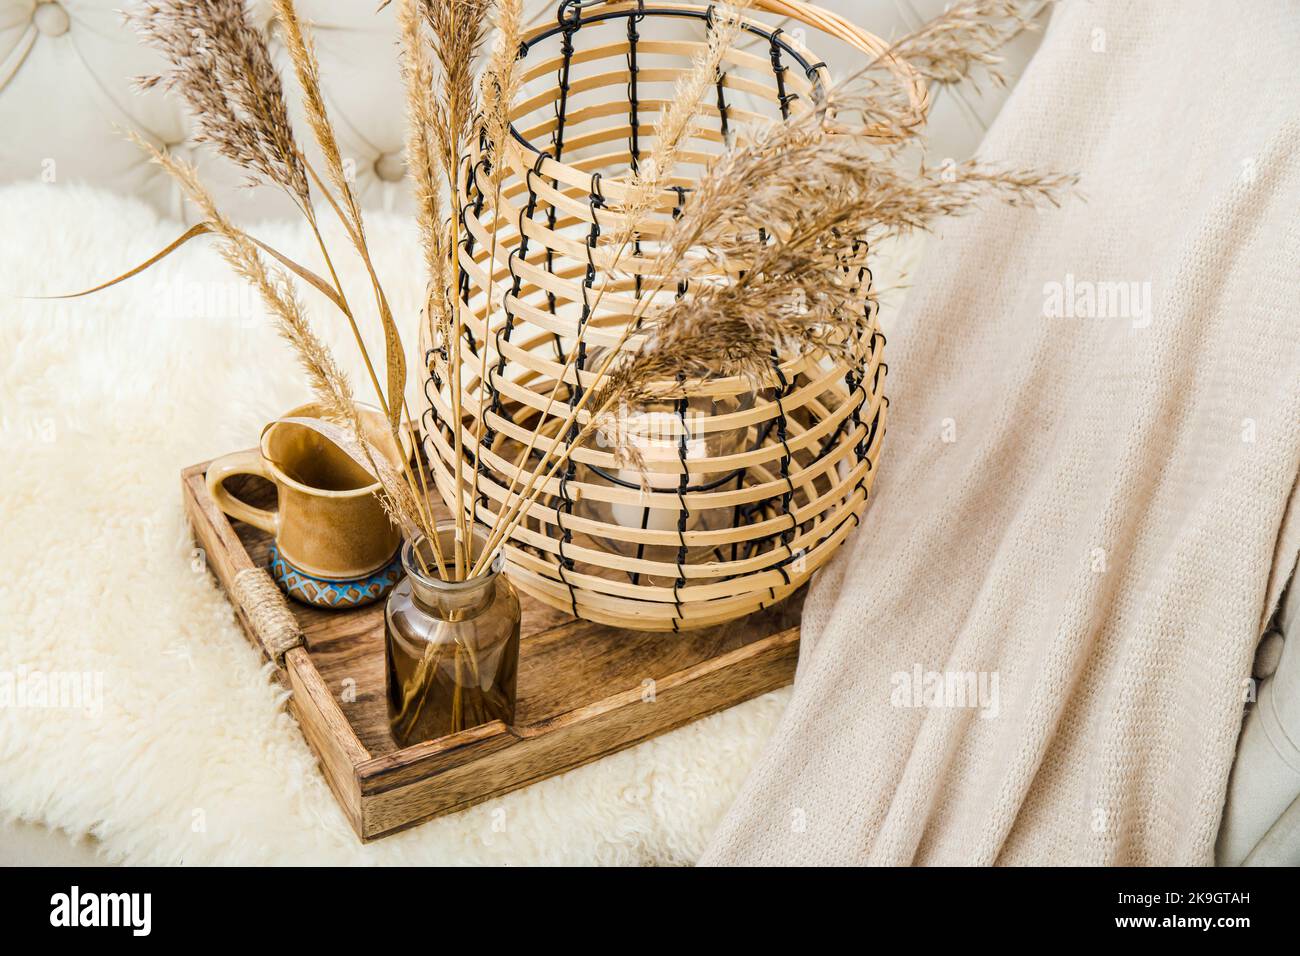 Cozycore or cottagecore concept, warm soft brown beige interior design objects. Cozy wool plaid on sofa, candle burning in wood lantern, tea cup. Stock Photo